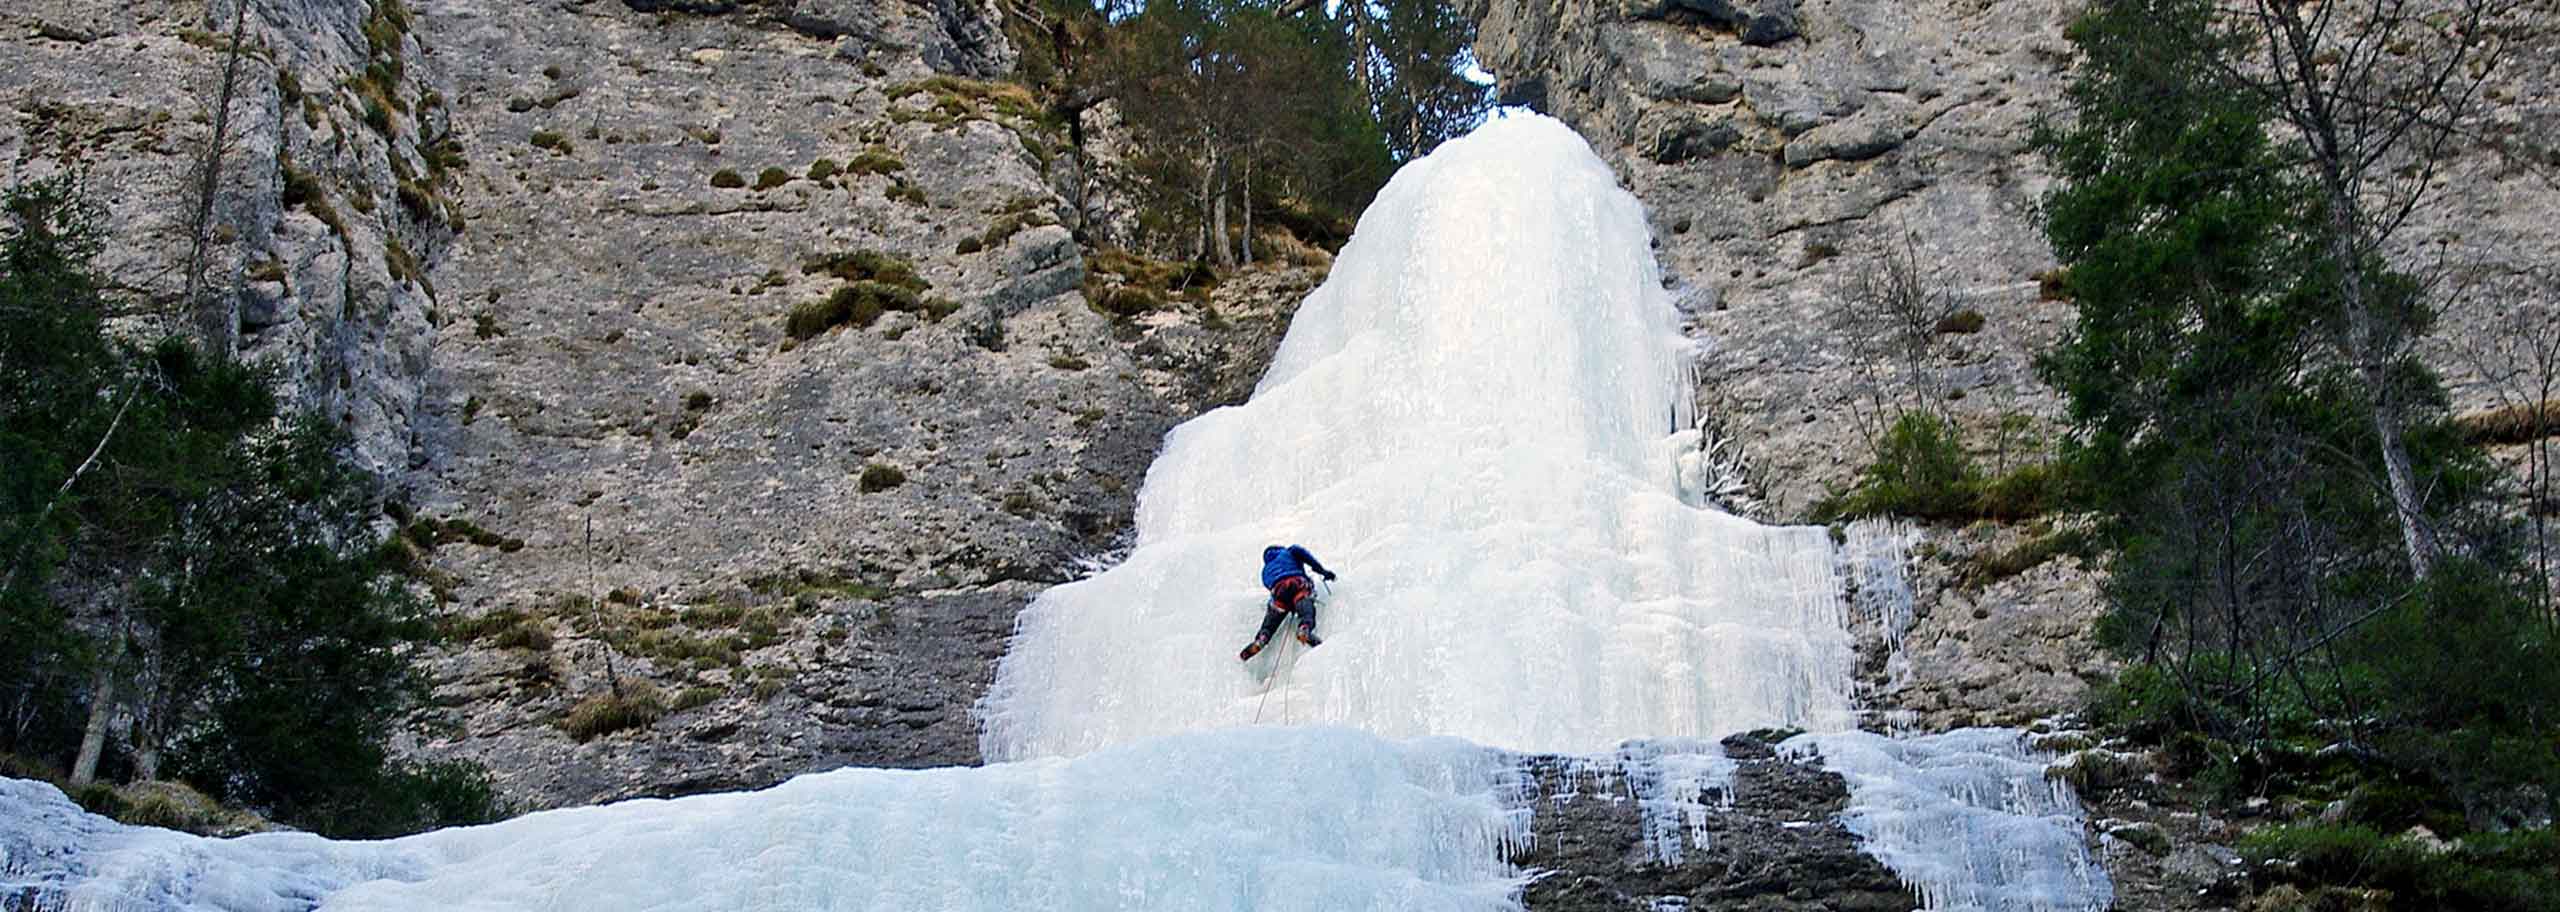 Ice Climbing with a Mountain Guide in the Alpe di Siusi